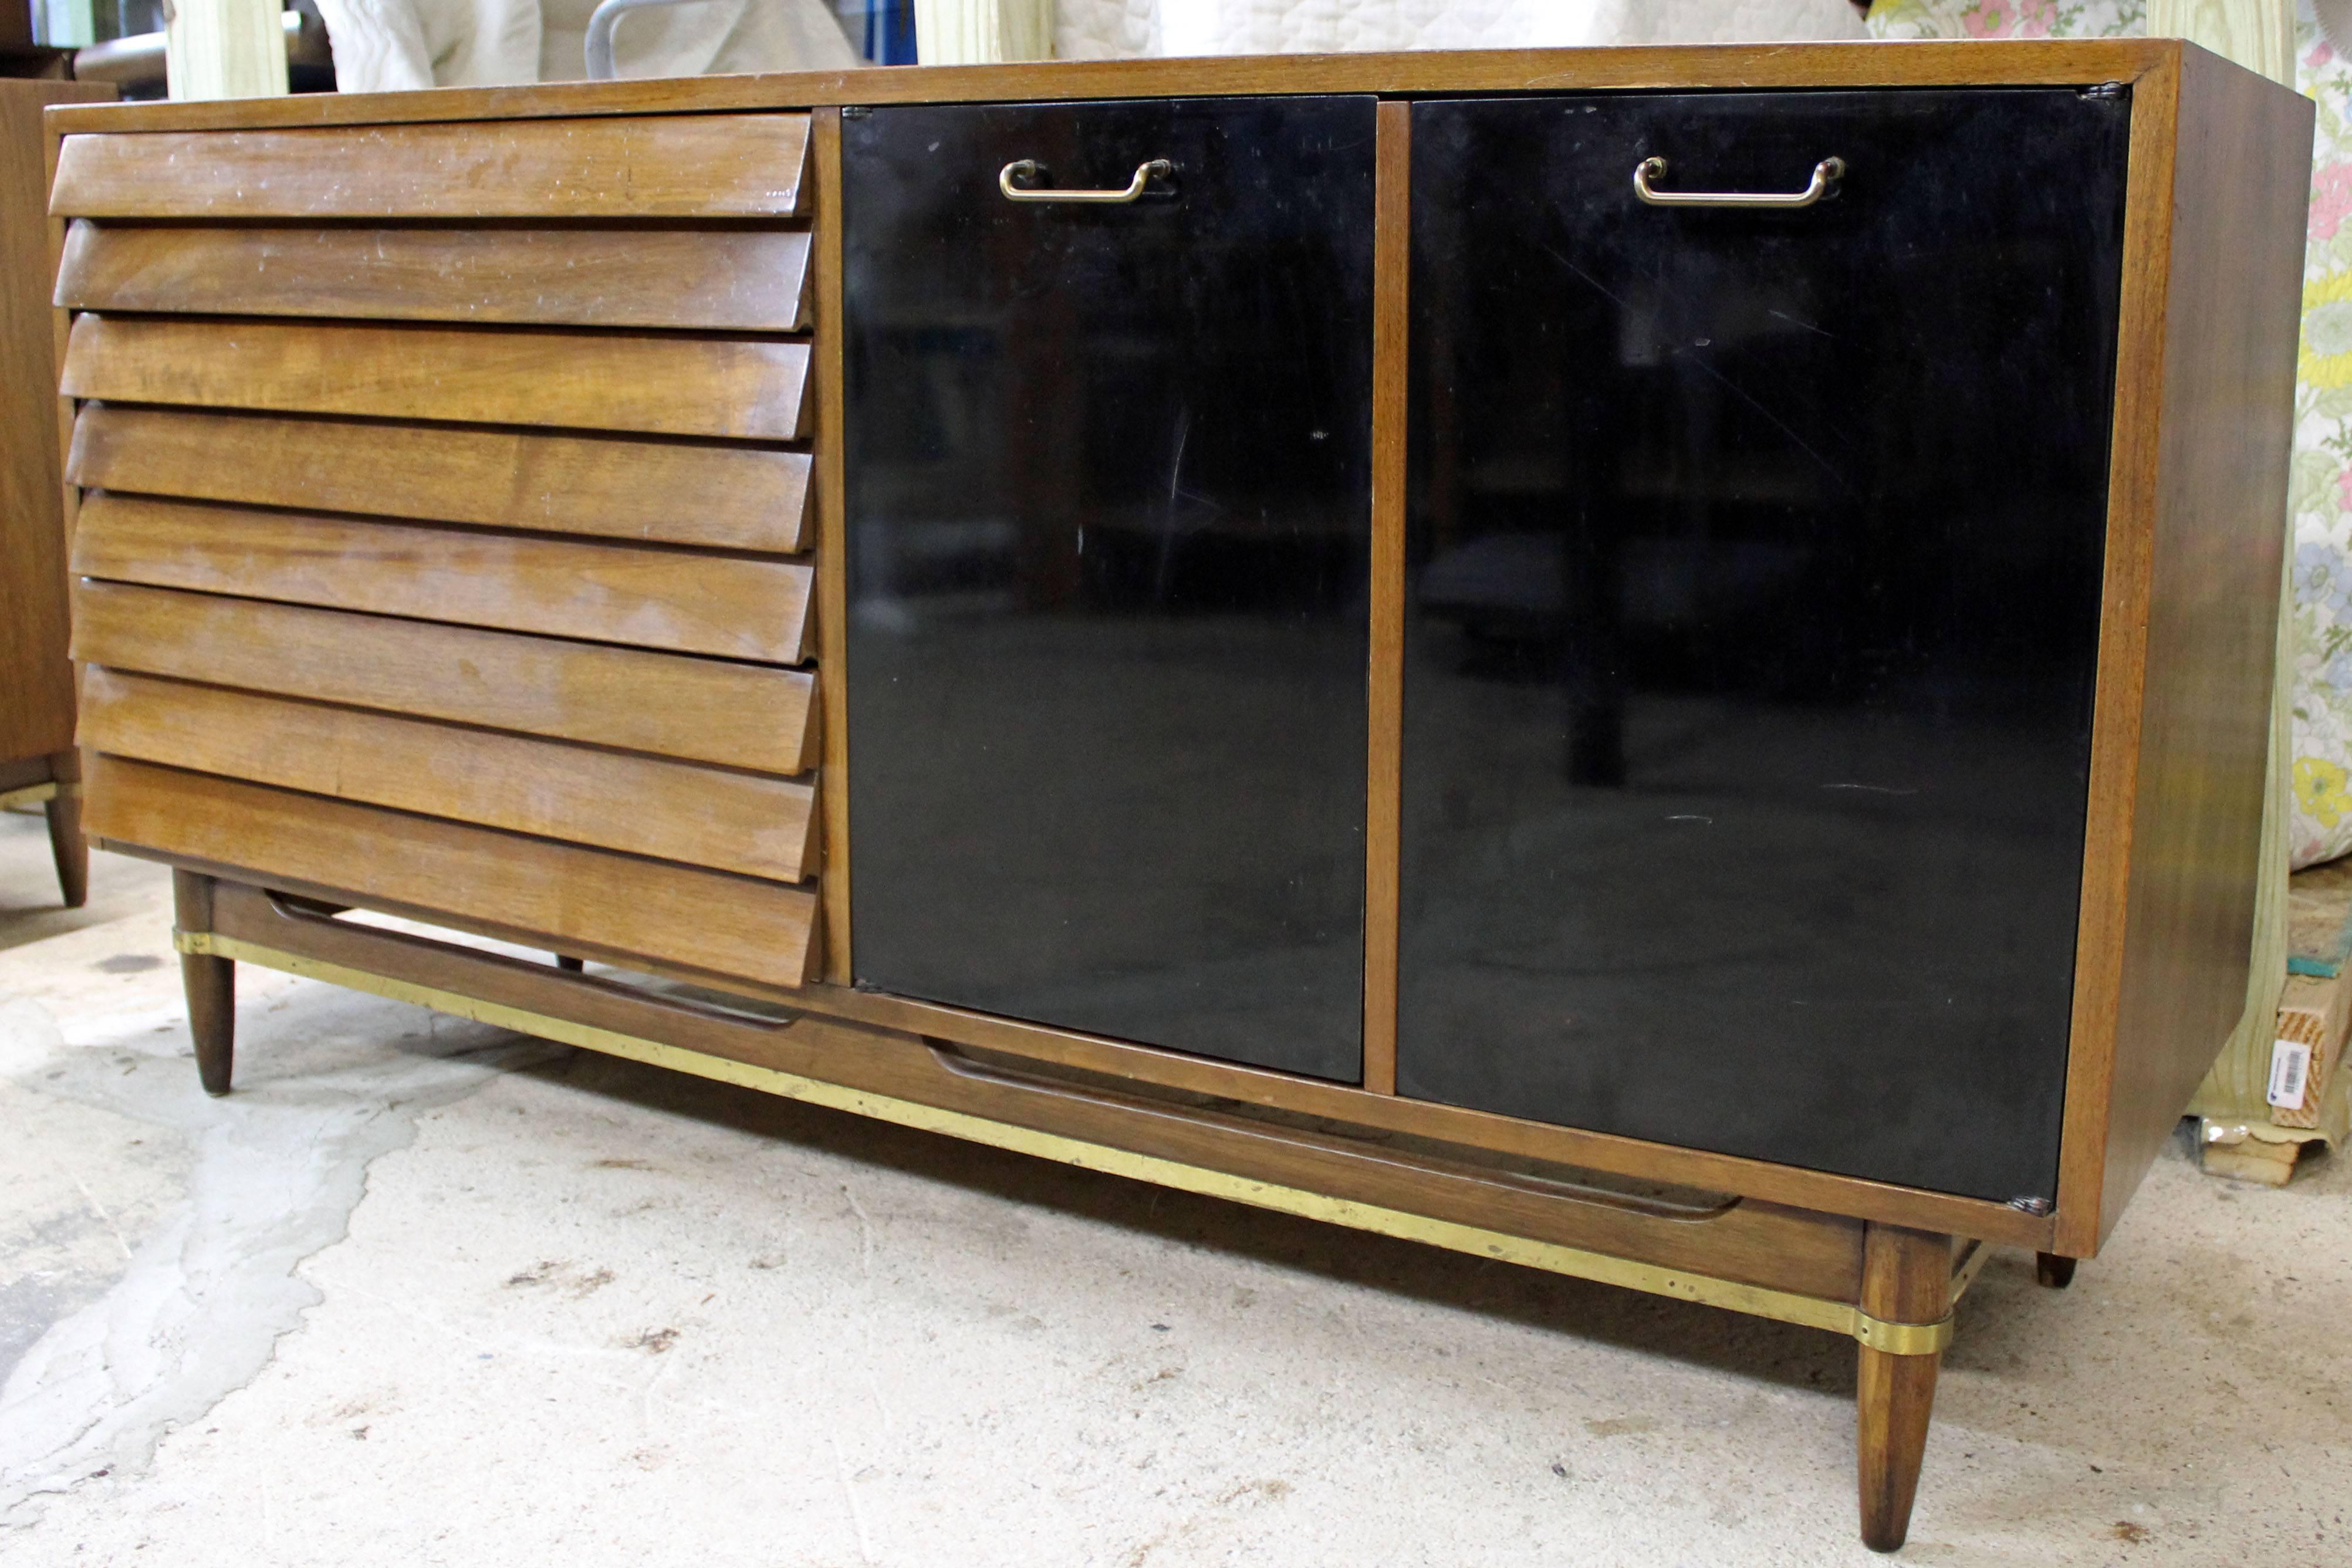 Offered is a credenza, designed by Merton L. Gershun for American of Martinsville's 